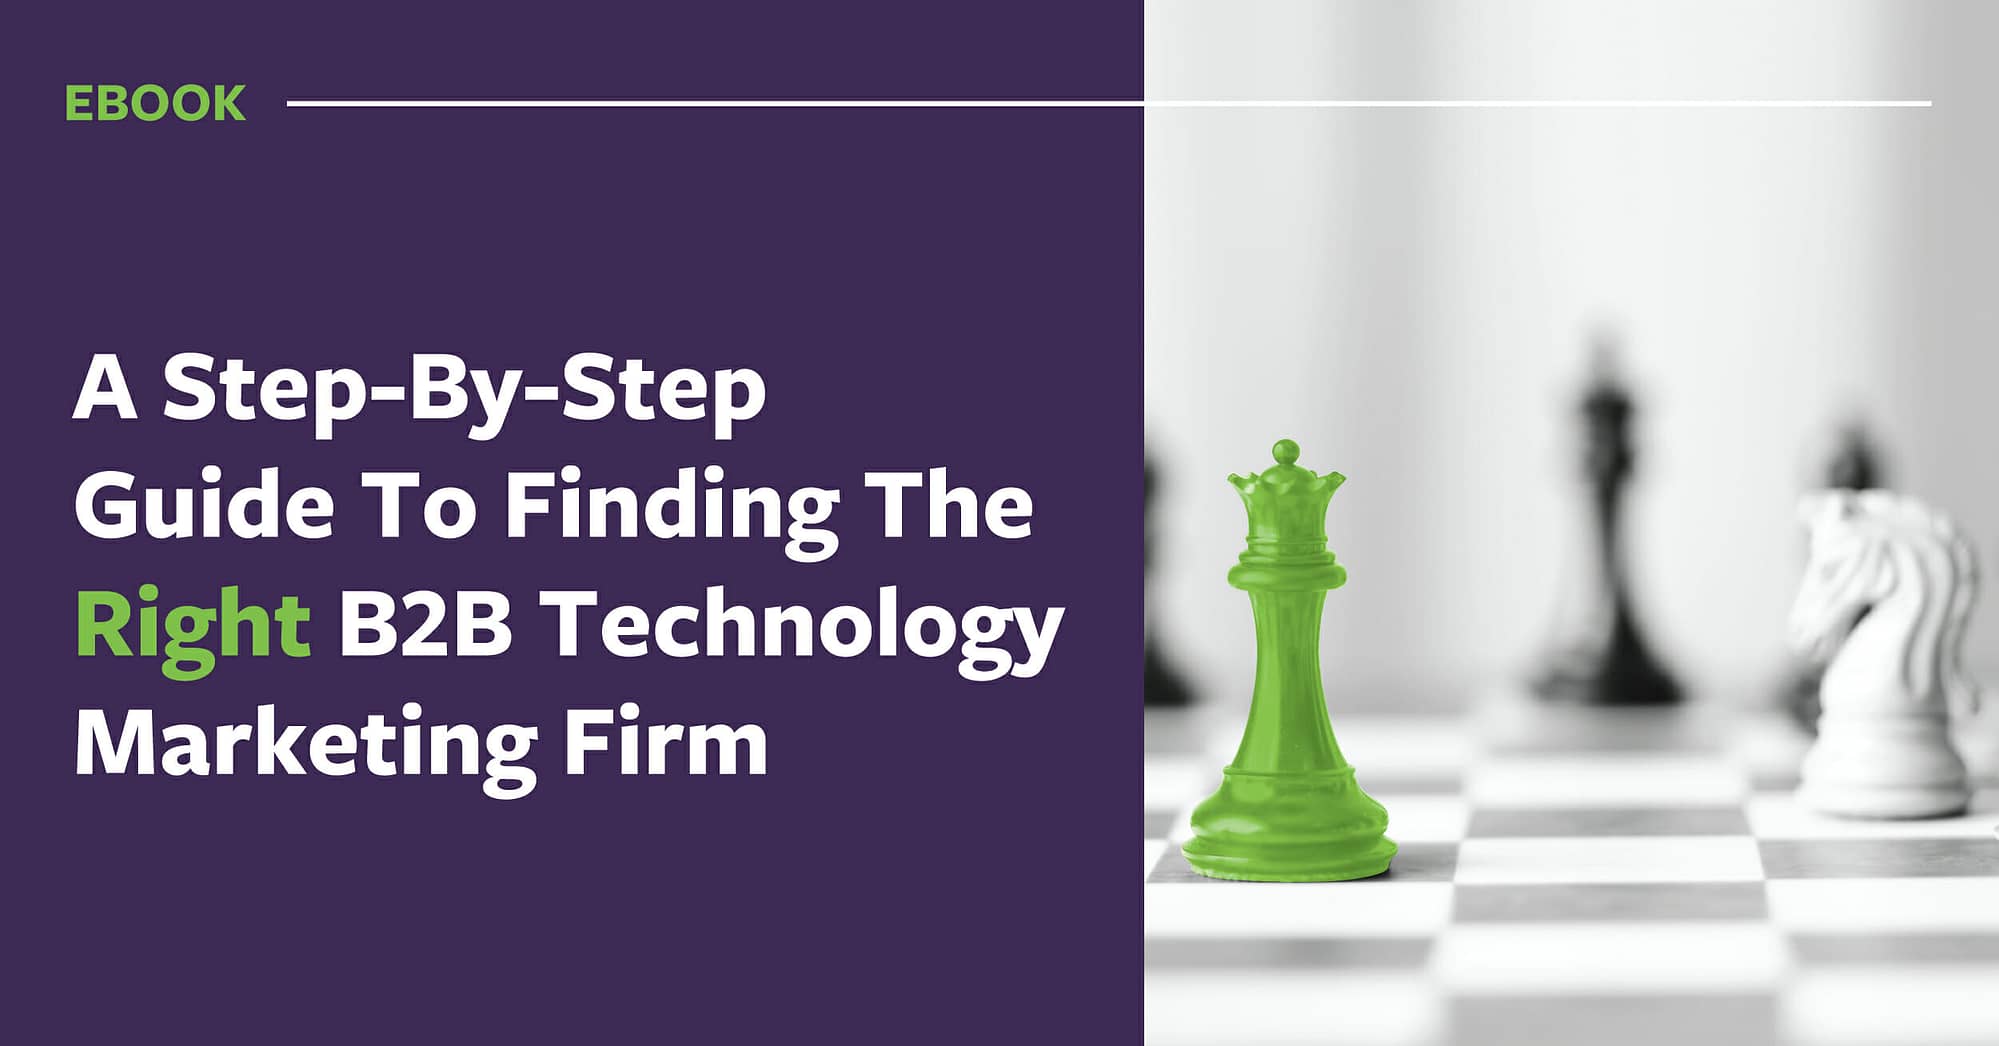 Guide To Finding The Right B2B Technology Marketing Firm